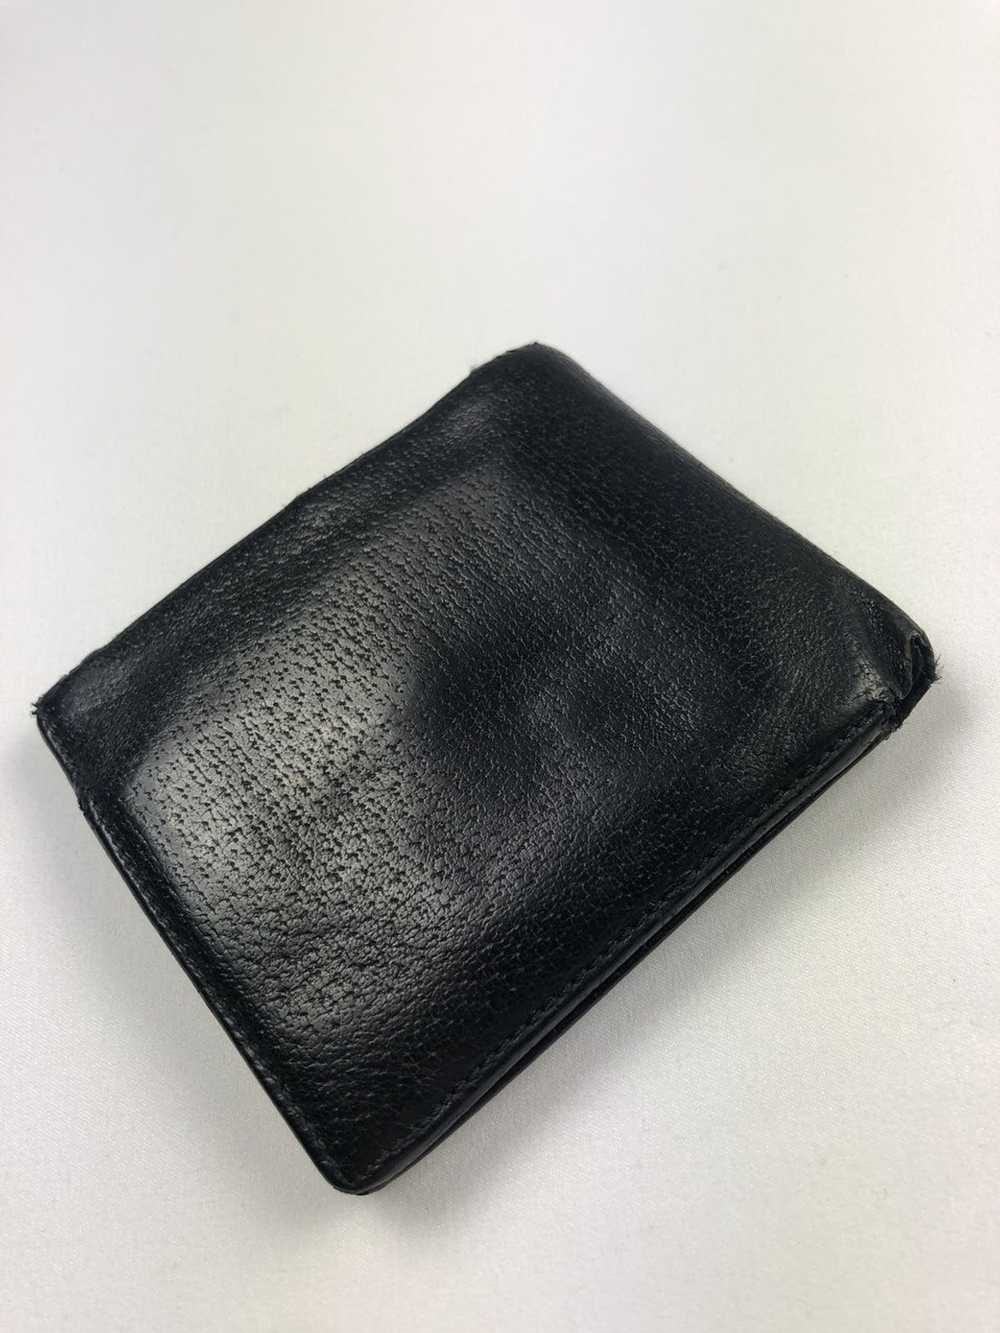 Gucci Gucci crest leather bifold wallet - image 8